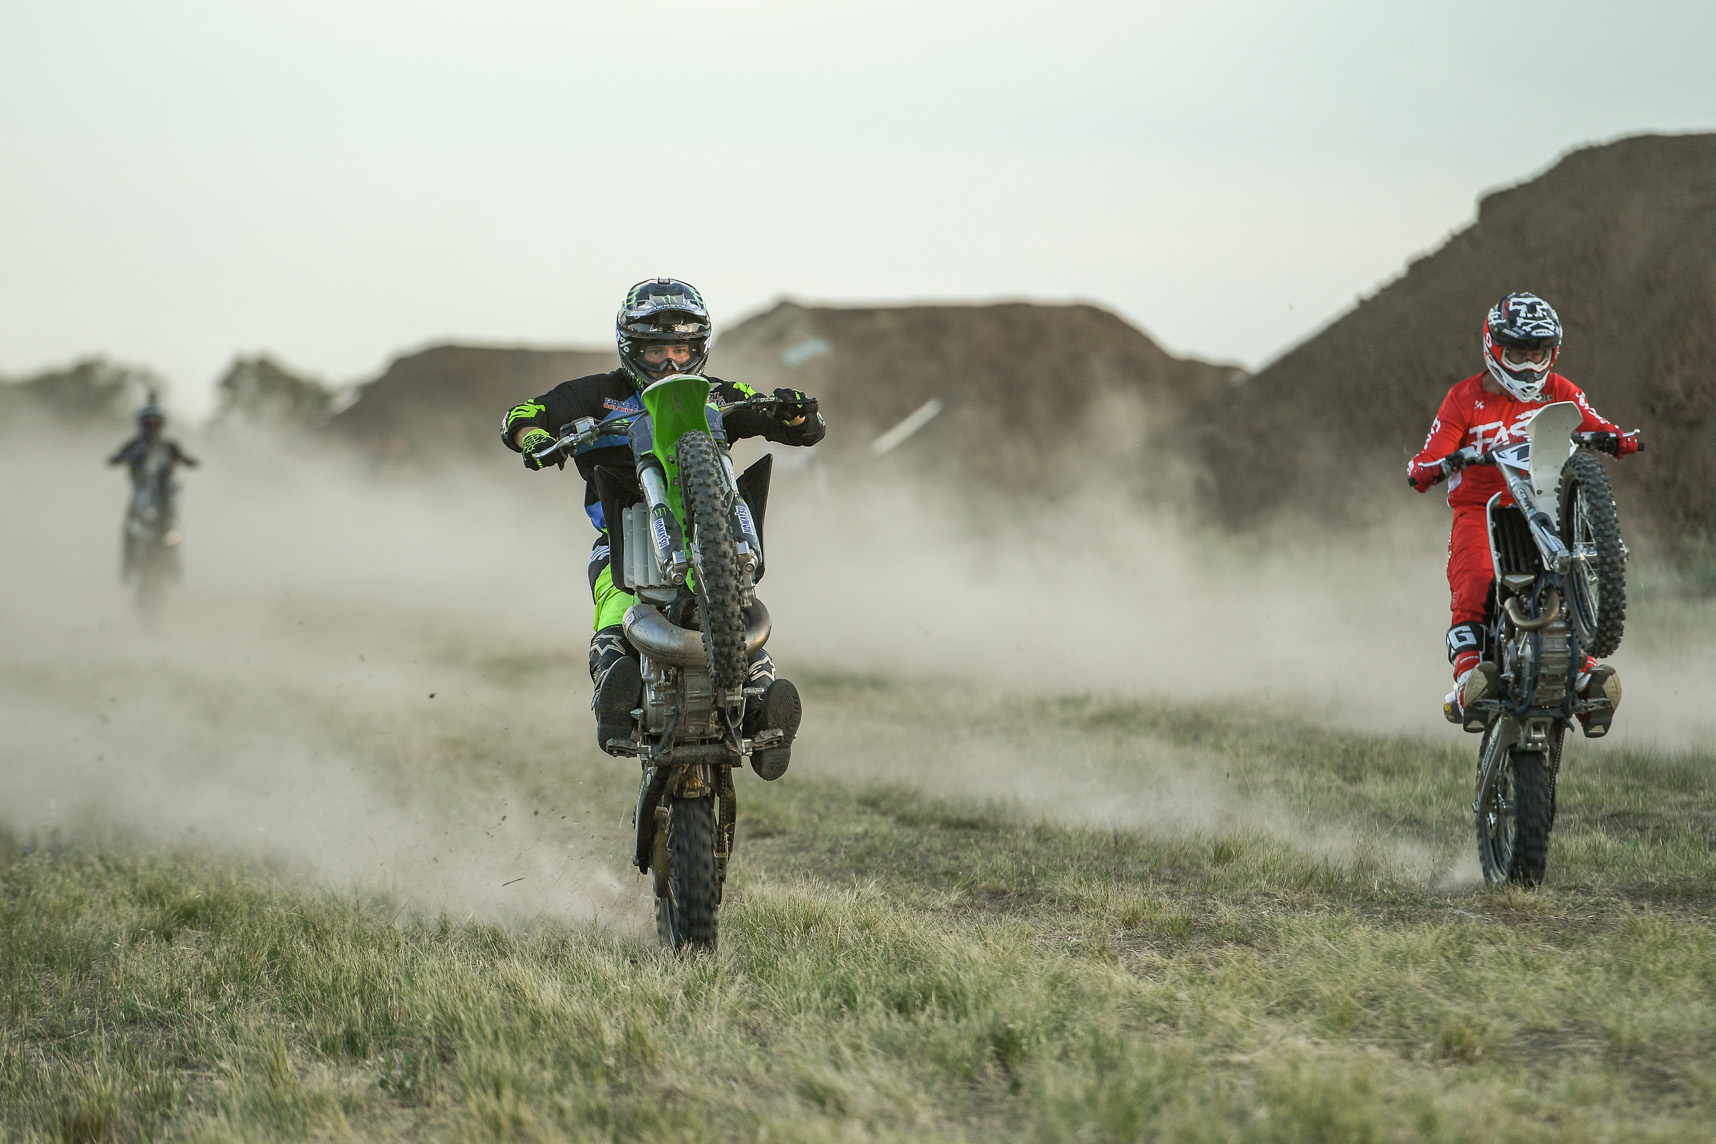 Monster Energy’s Jackson Strong Premieres New Freestyle Motocross Feature on ABC Television